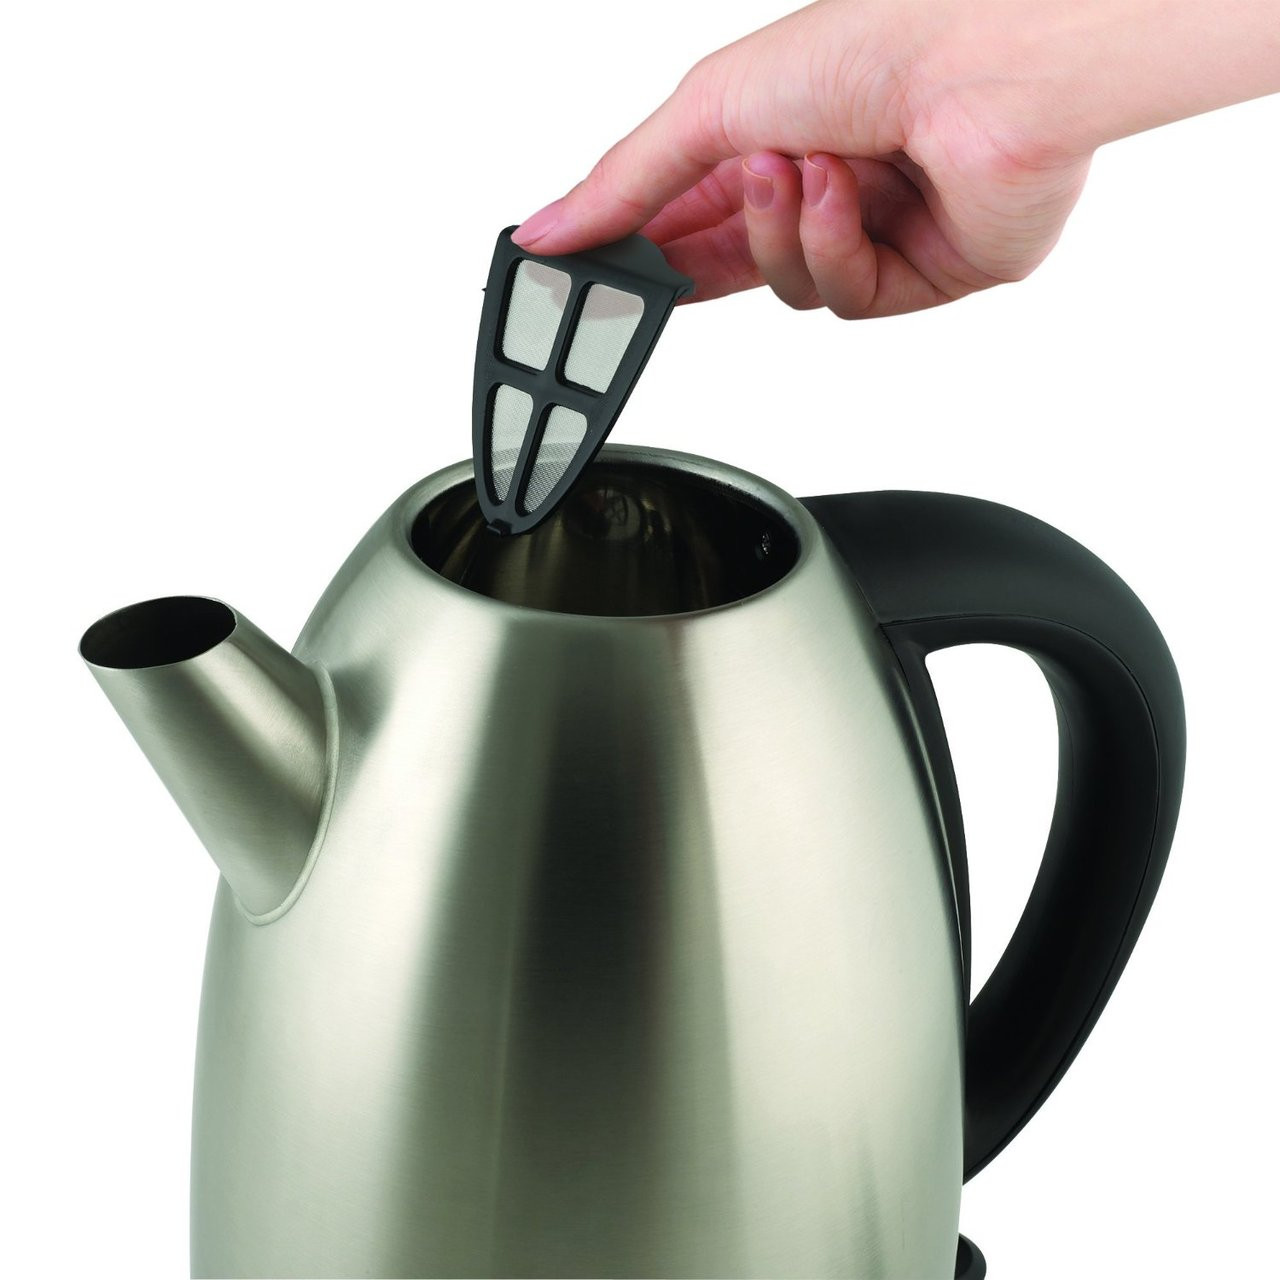 russell hobbs electric kettle